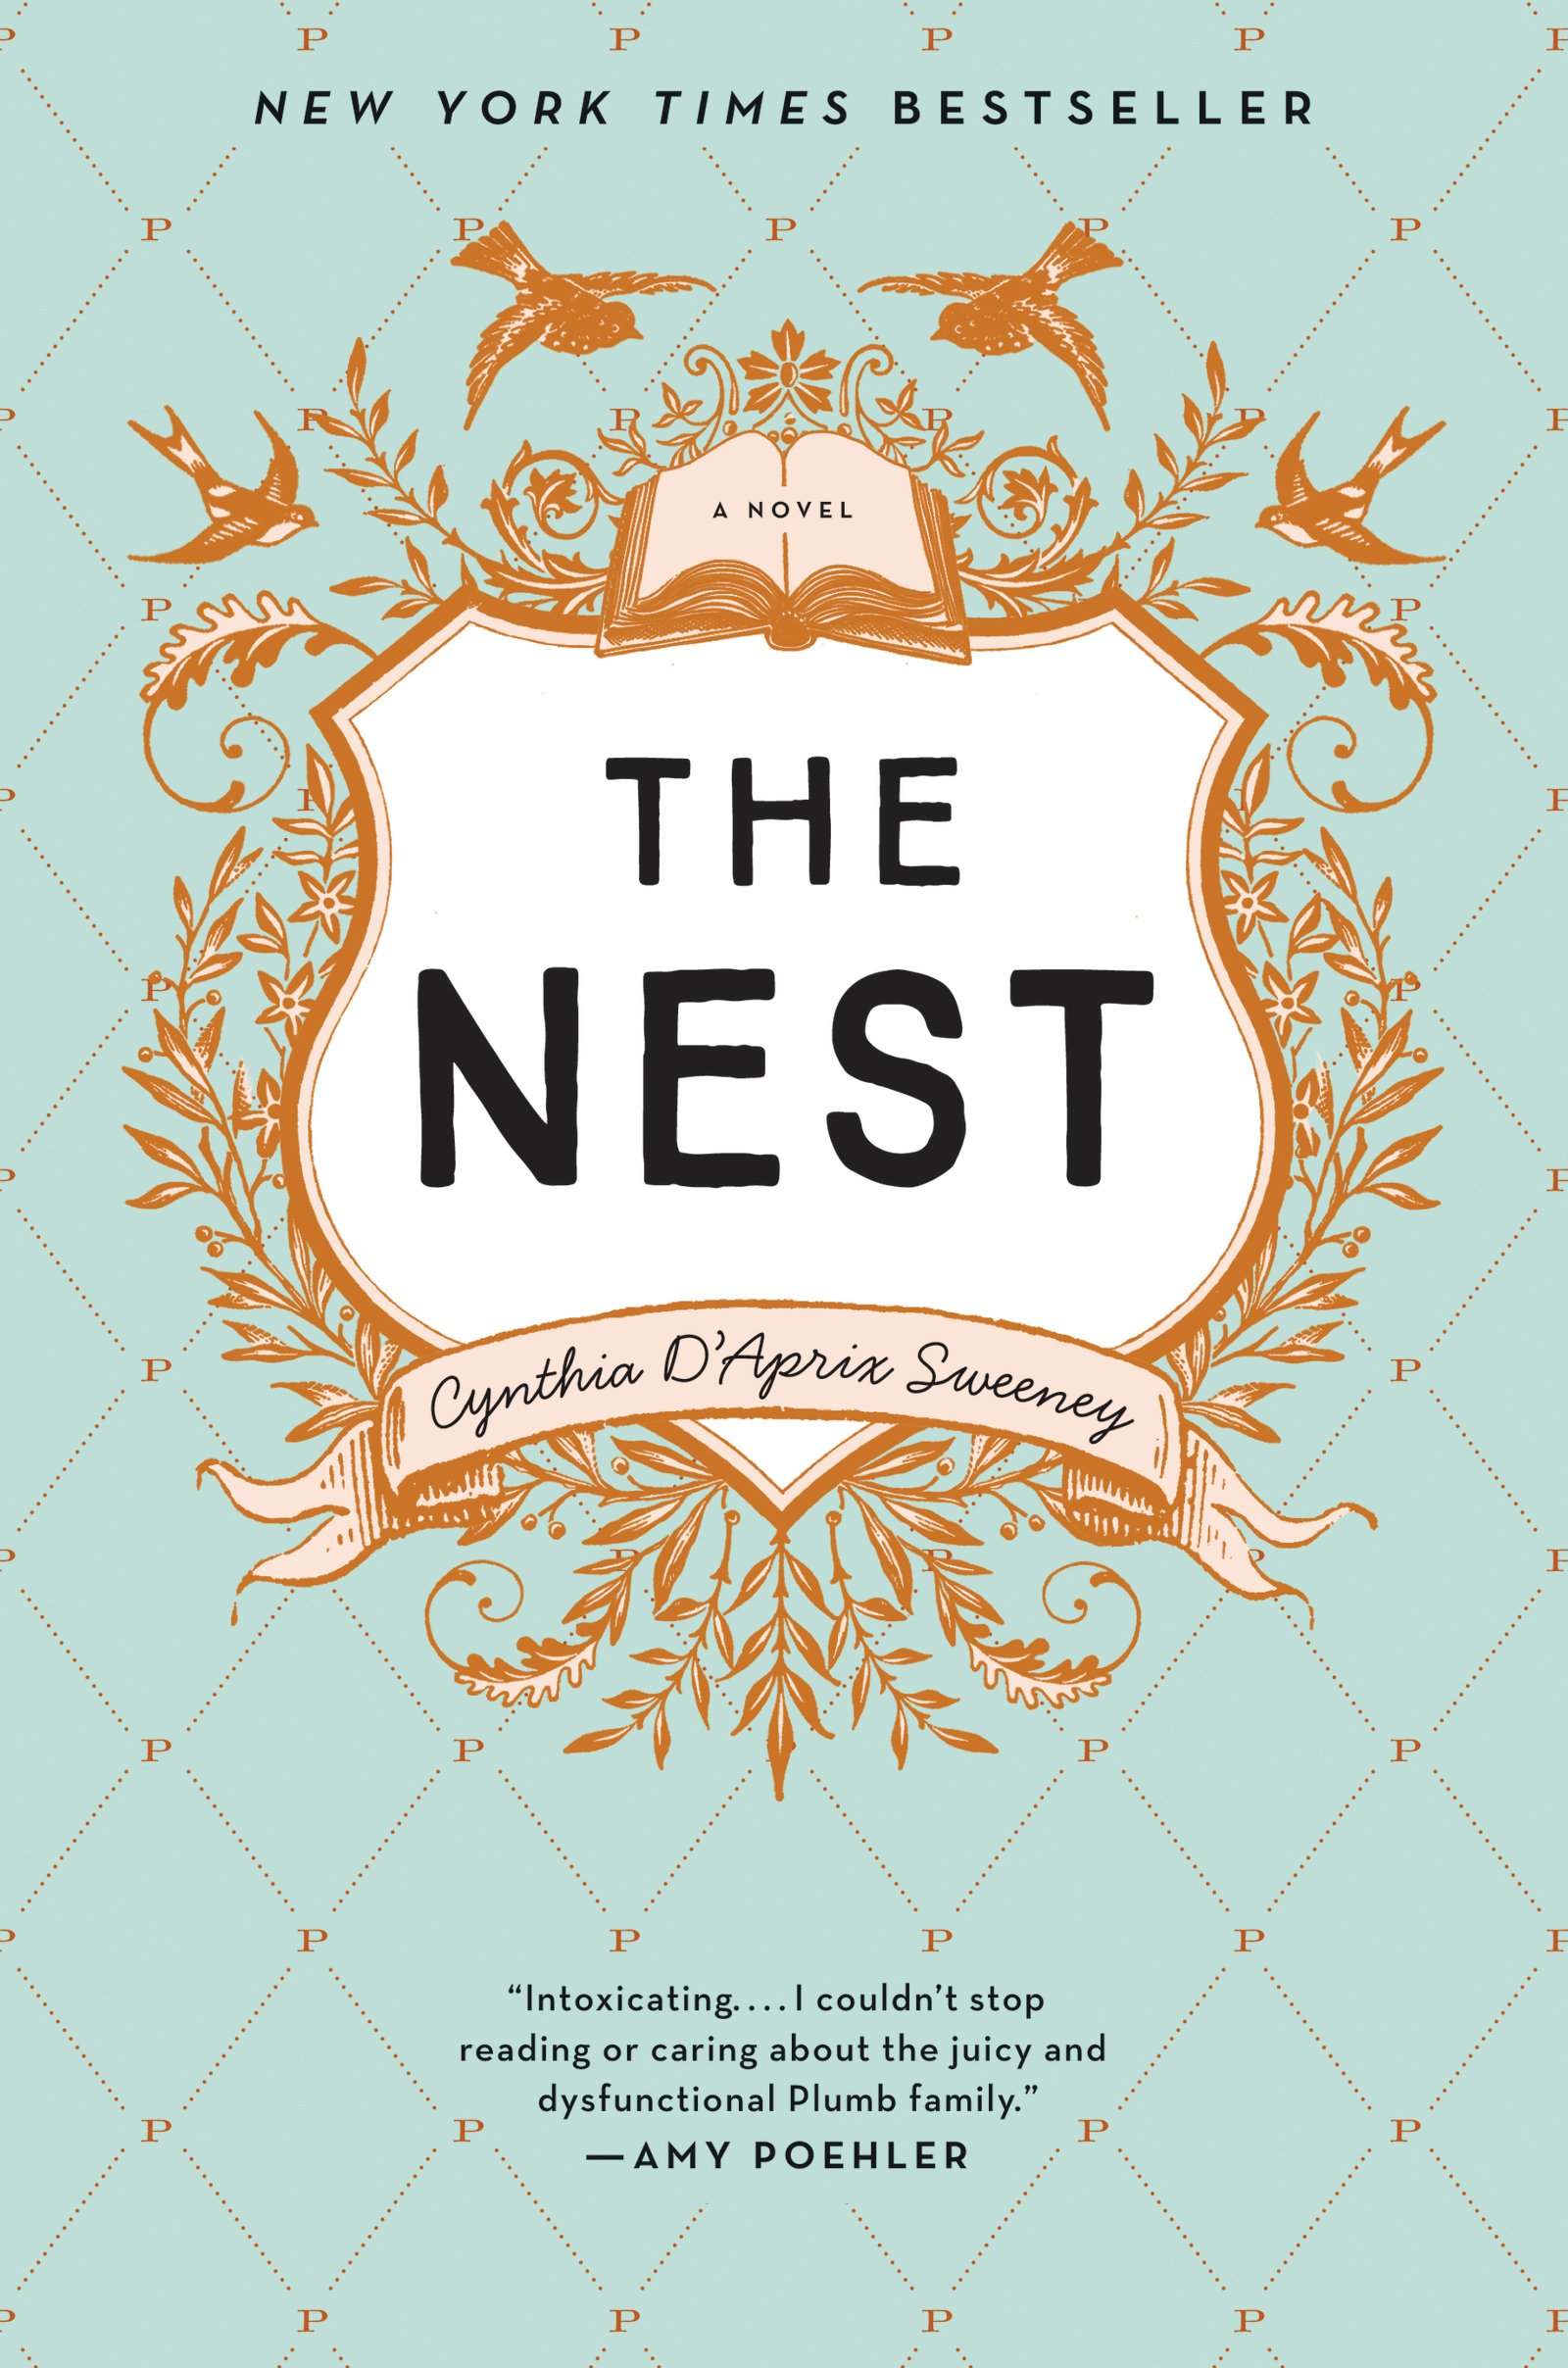 Book review: The Nest